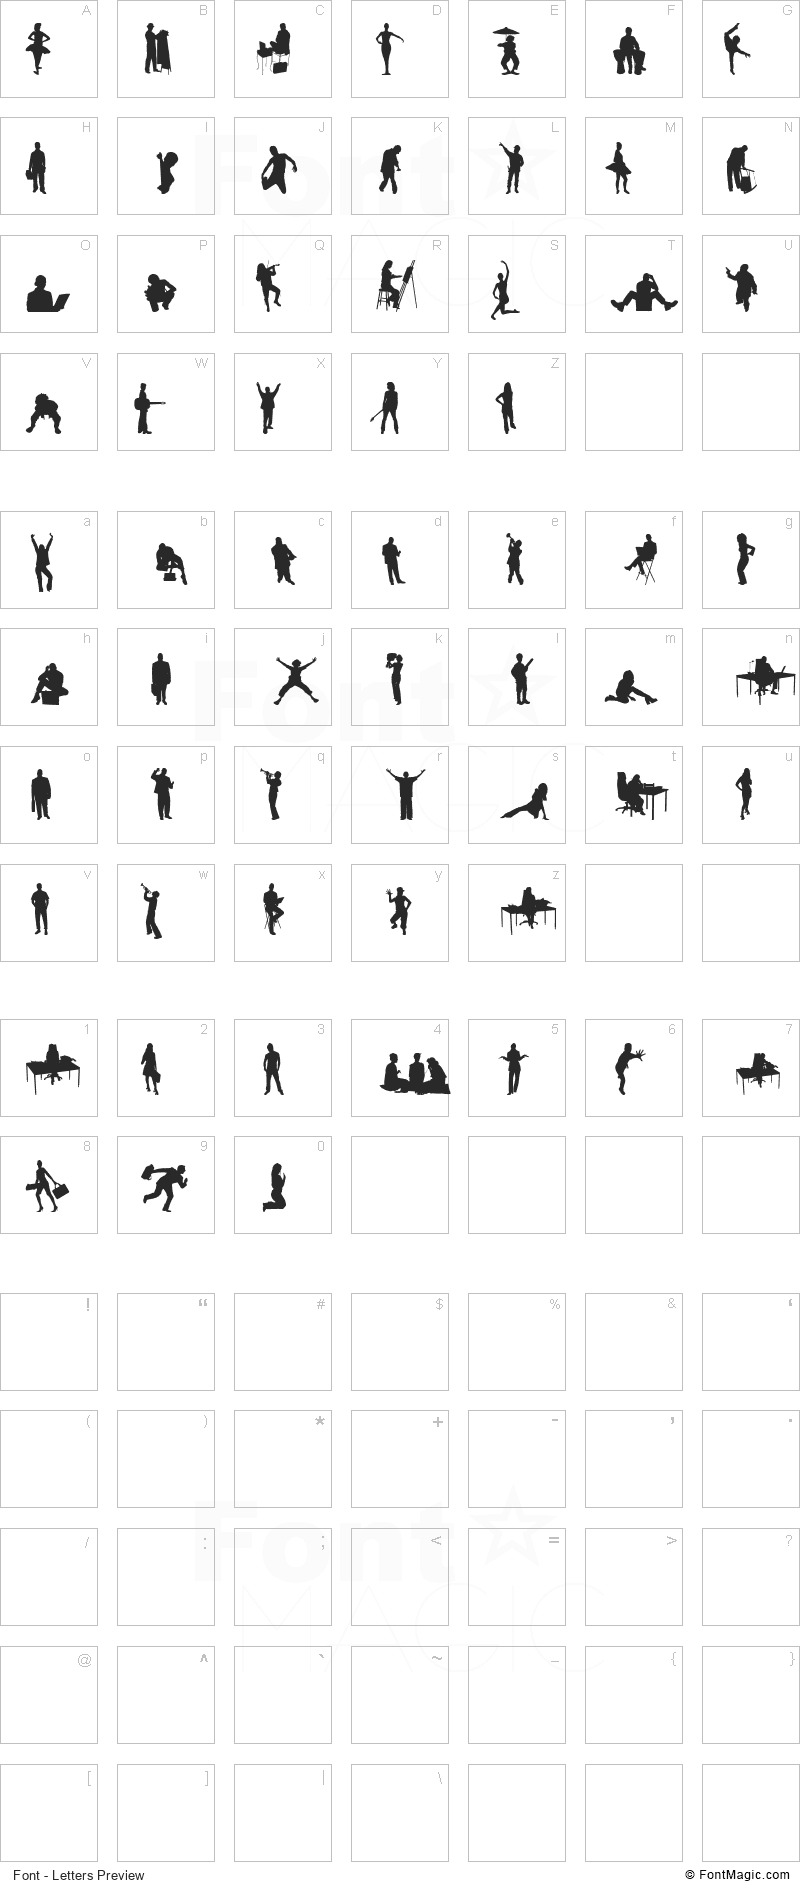 Human Silhouettes Two Font - All Latters Preview Chart